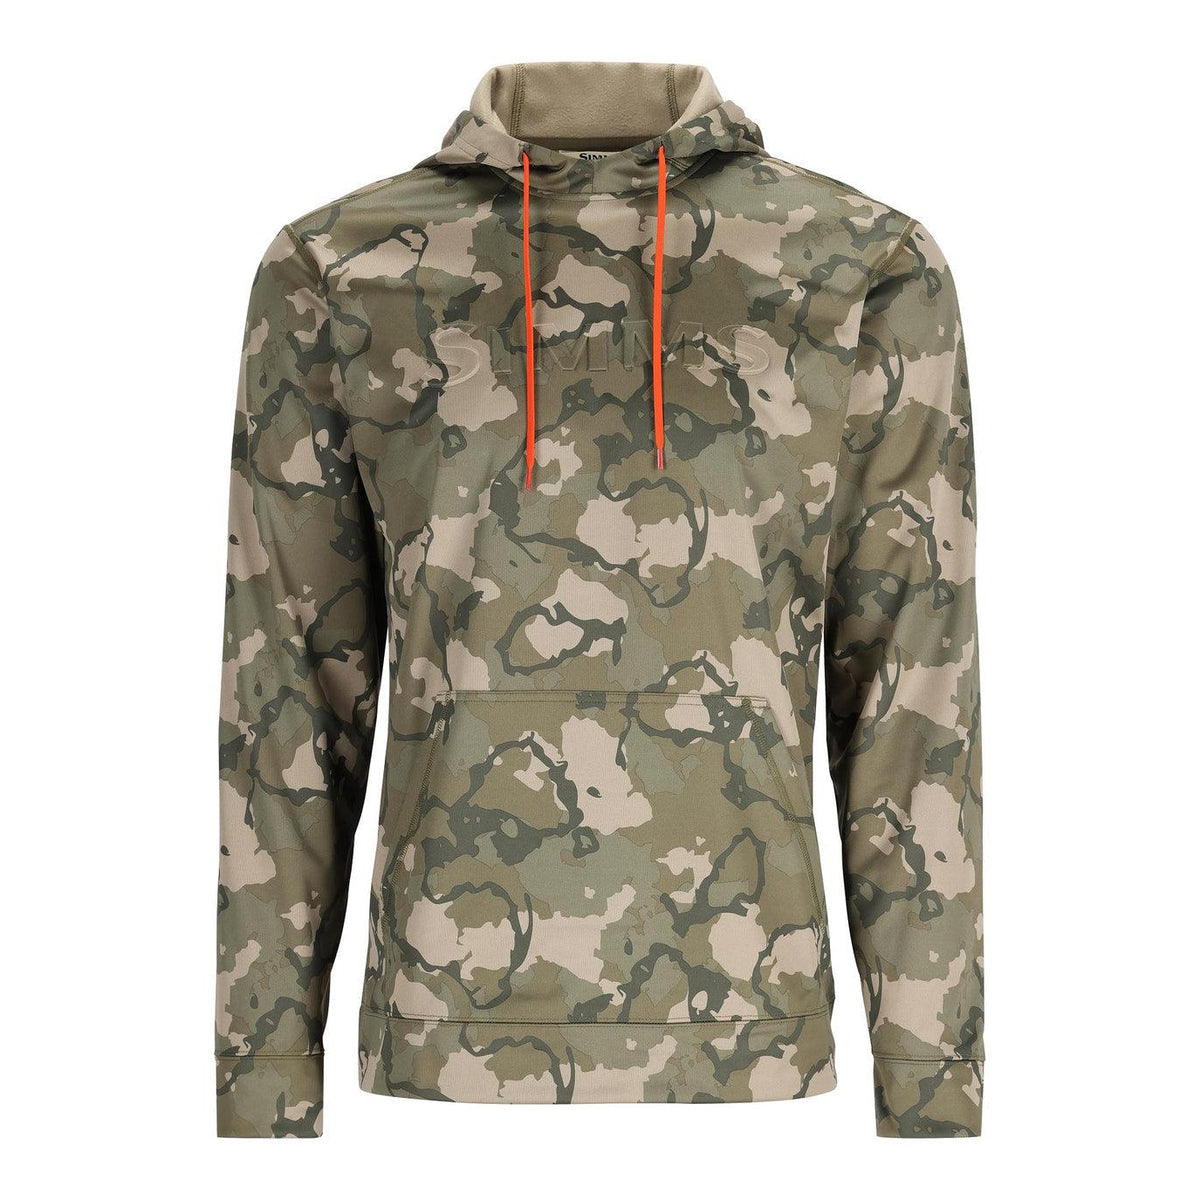 View of Hoodies-Sweatshirts M's Simms Challenger Hoody M Regiment Camo Olive Drab available at EZOKO Pike and Musky Shop